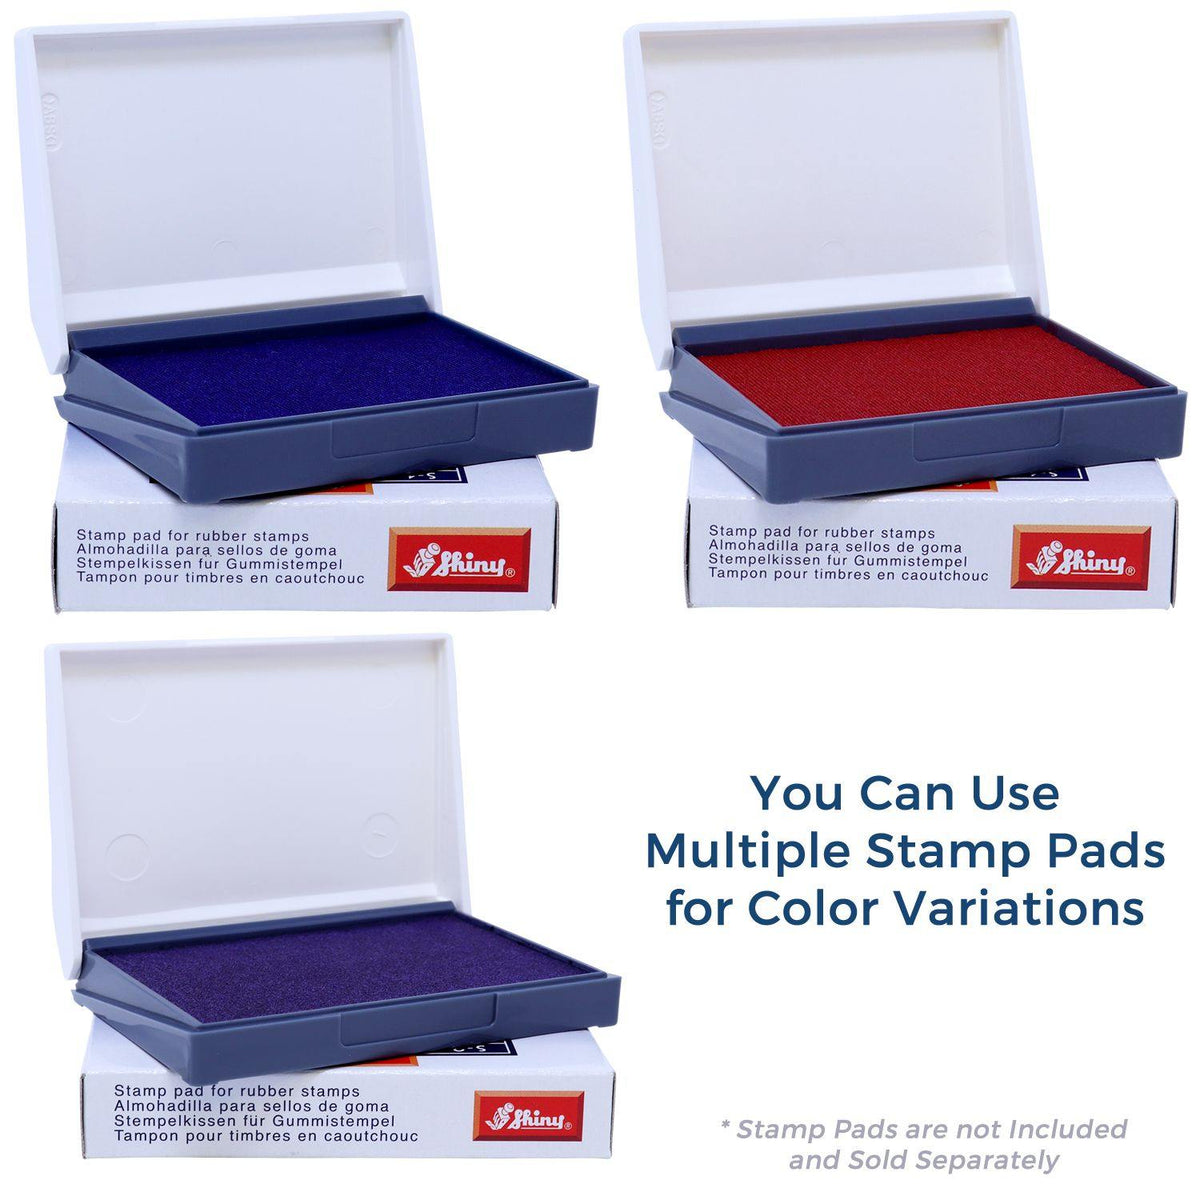 Stamp Pads for Special Handling Rubber Stamp Available